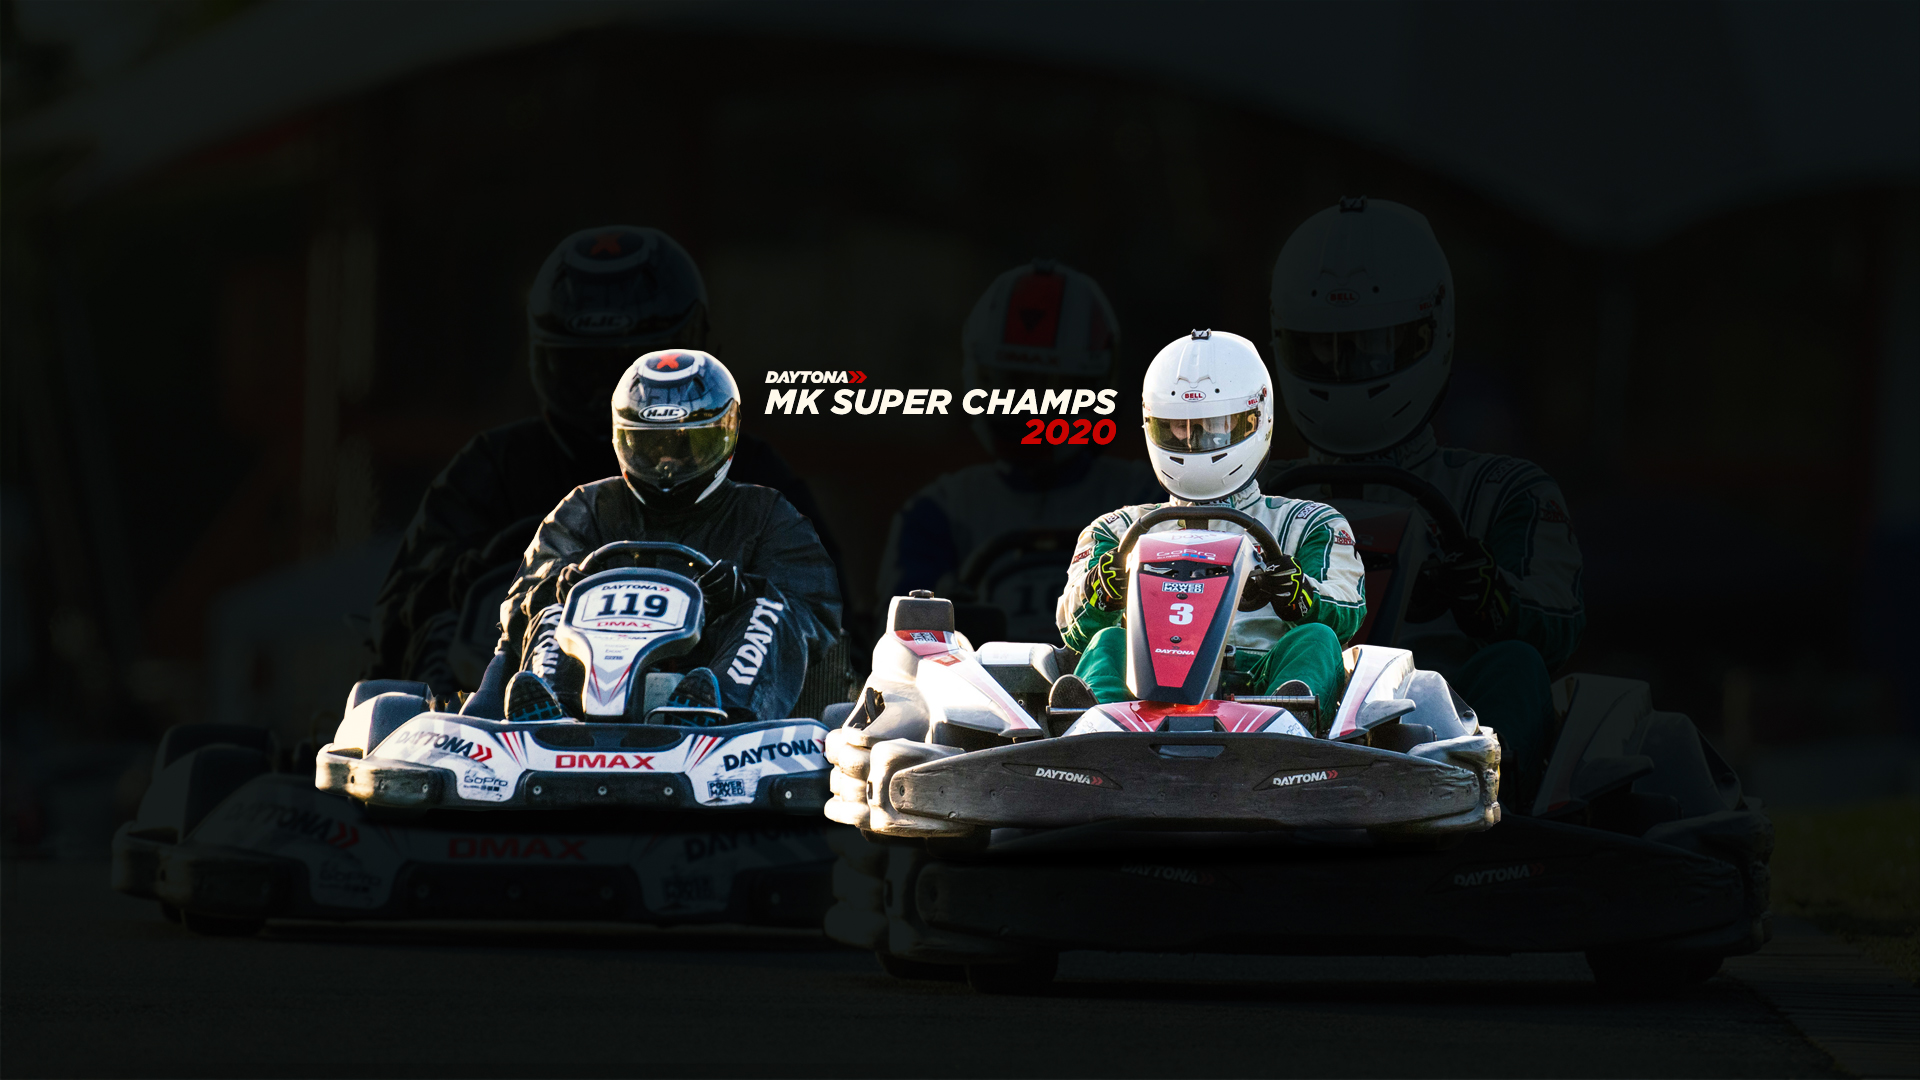 LIMITED SPACES REMAINING: MK SUPER CHAMPS 2020